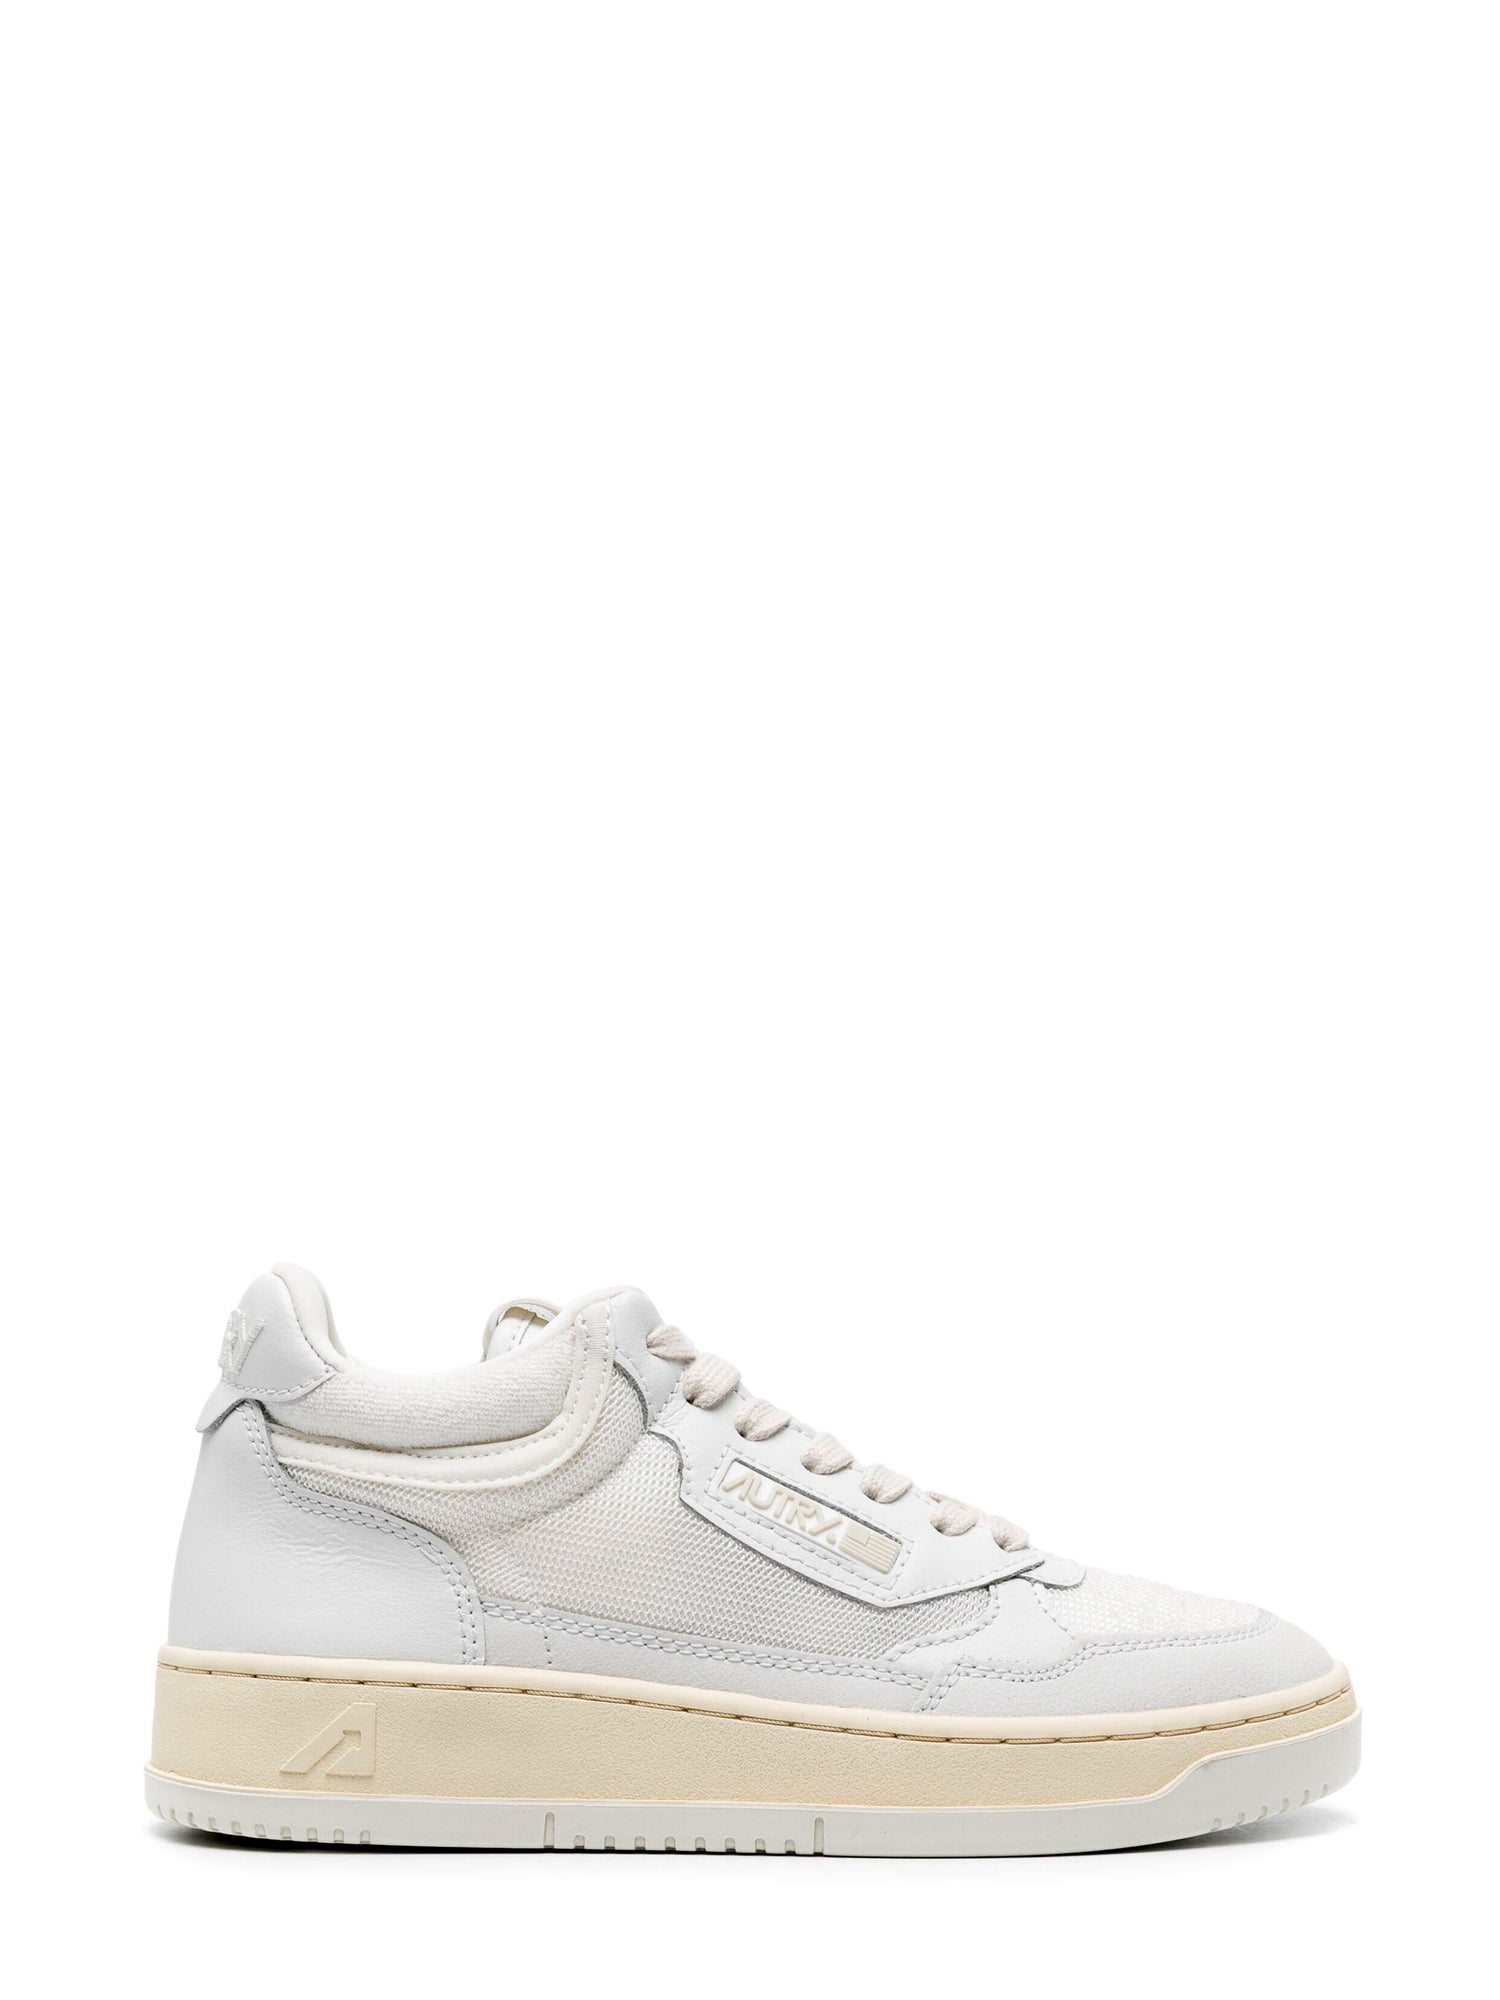 Tennis mid sneakers, tennis/leather white